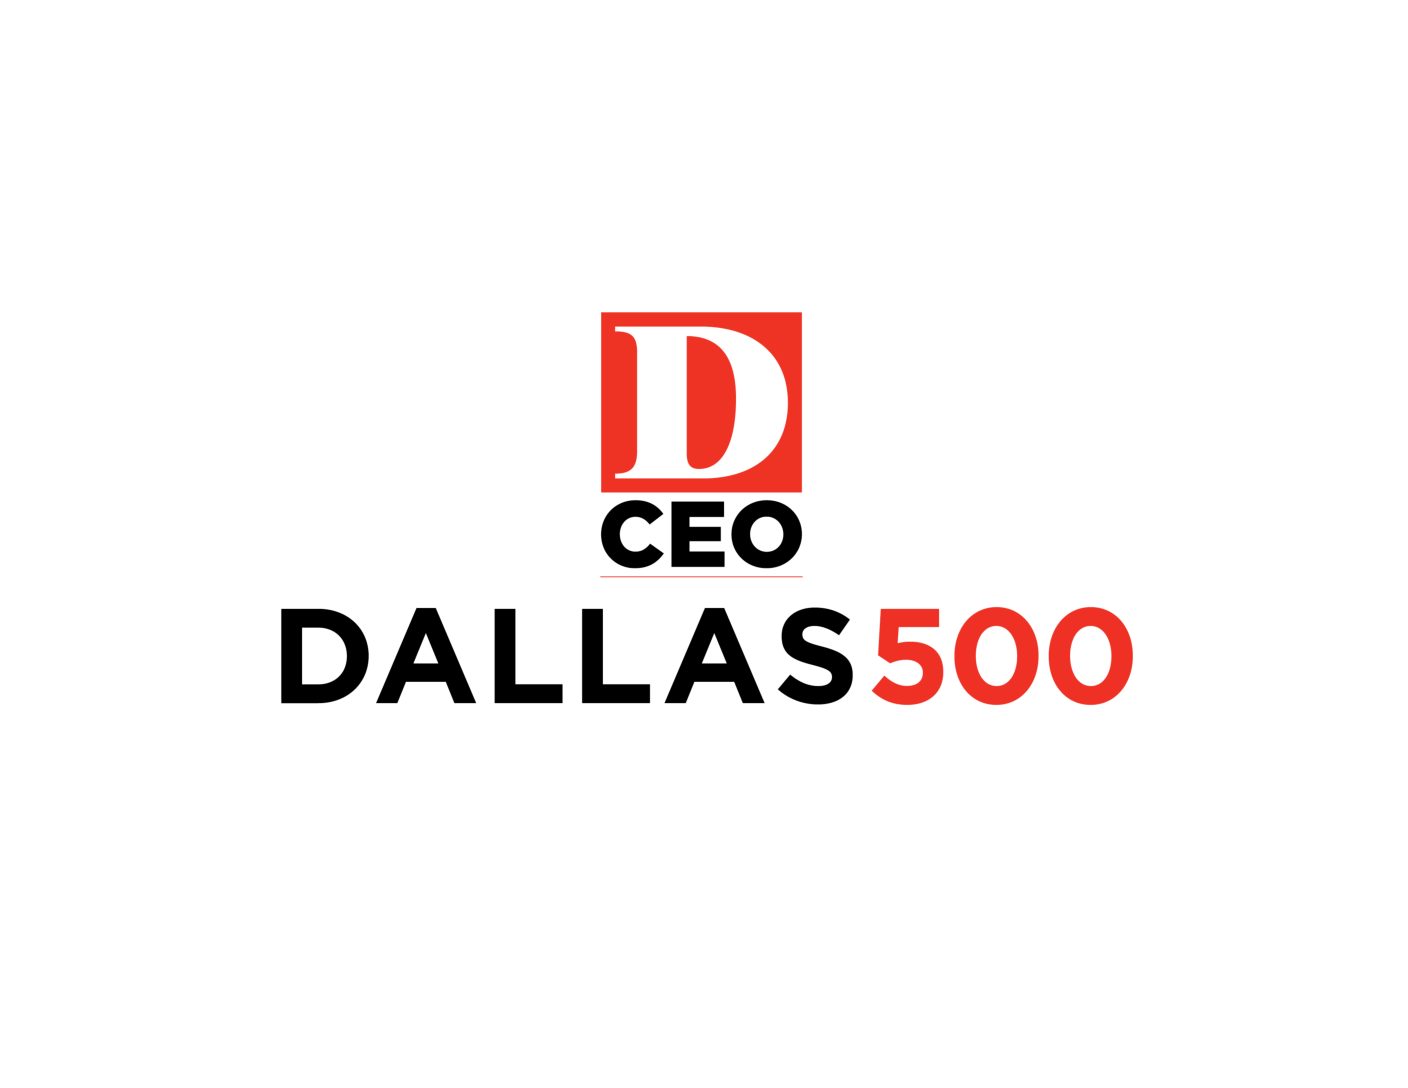 David Kiger Named a Top Business Leader in Dallas-Fort Worth